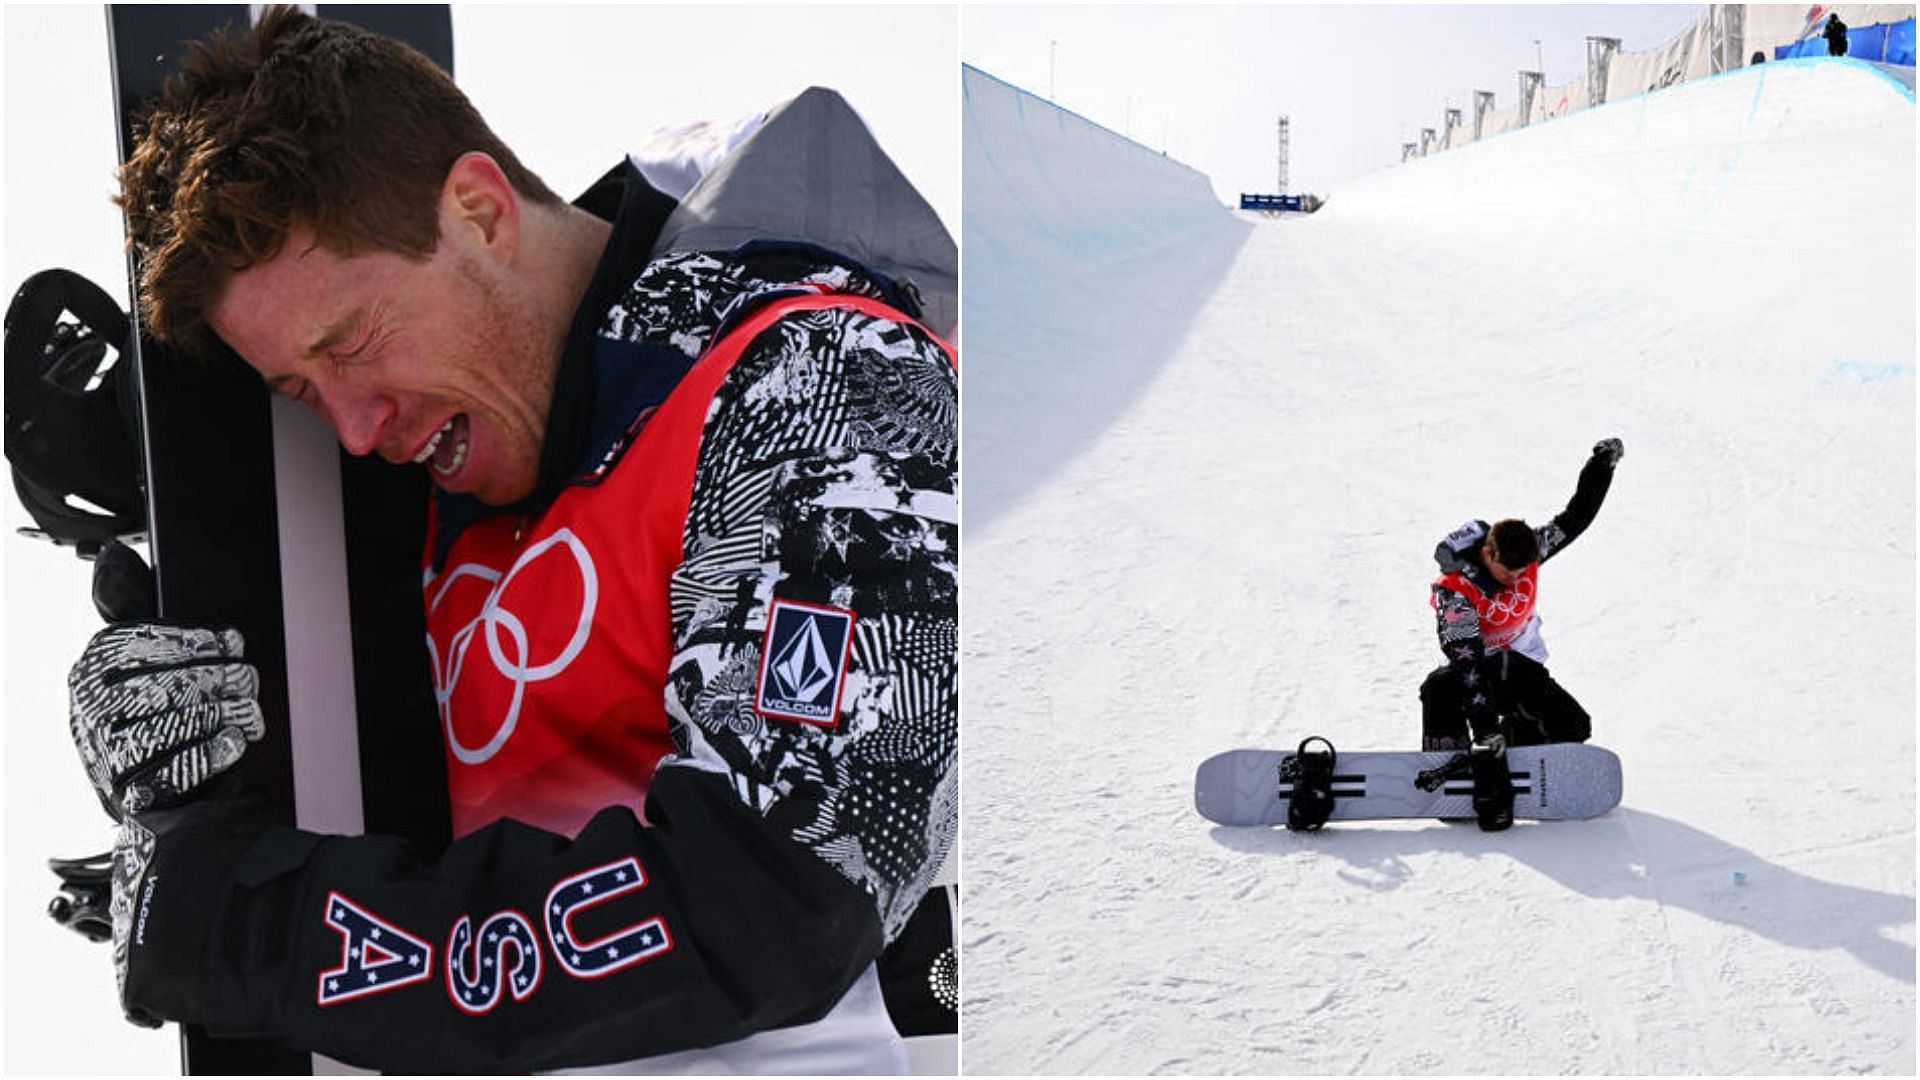 Snowboarder Shaun White emotional after his final Winter Olympics Performance (Pic Credit: Reuters)